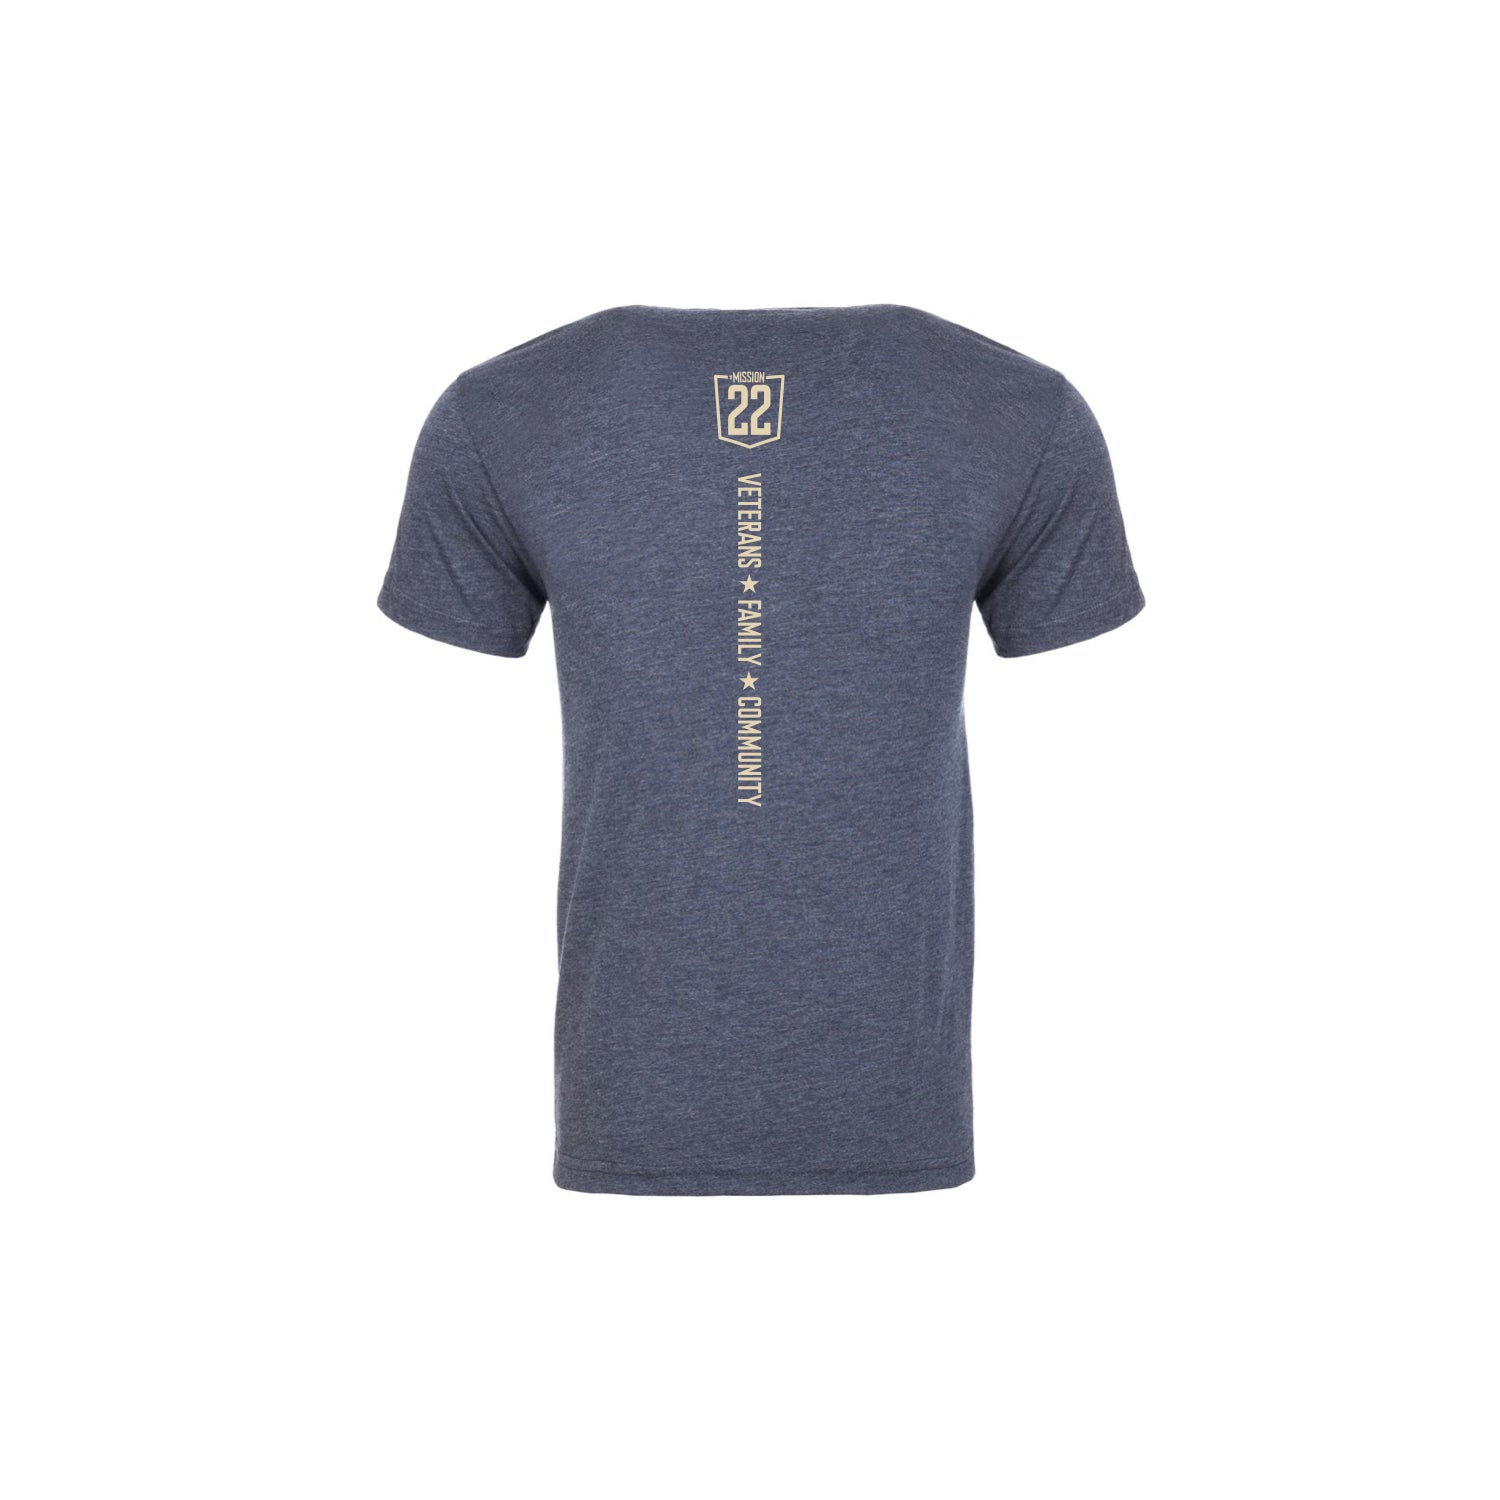 Product Image of Mission 22 Push-Up Challenge Tee #2